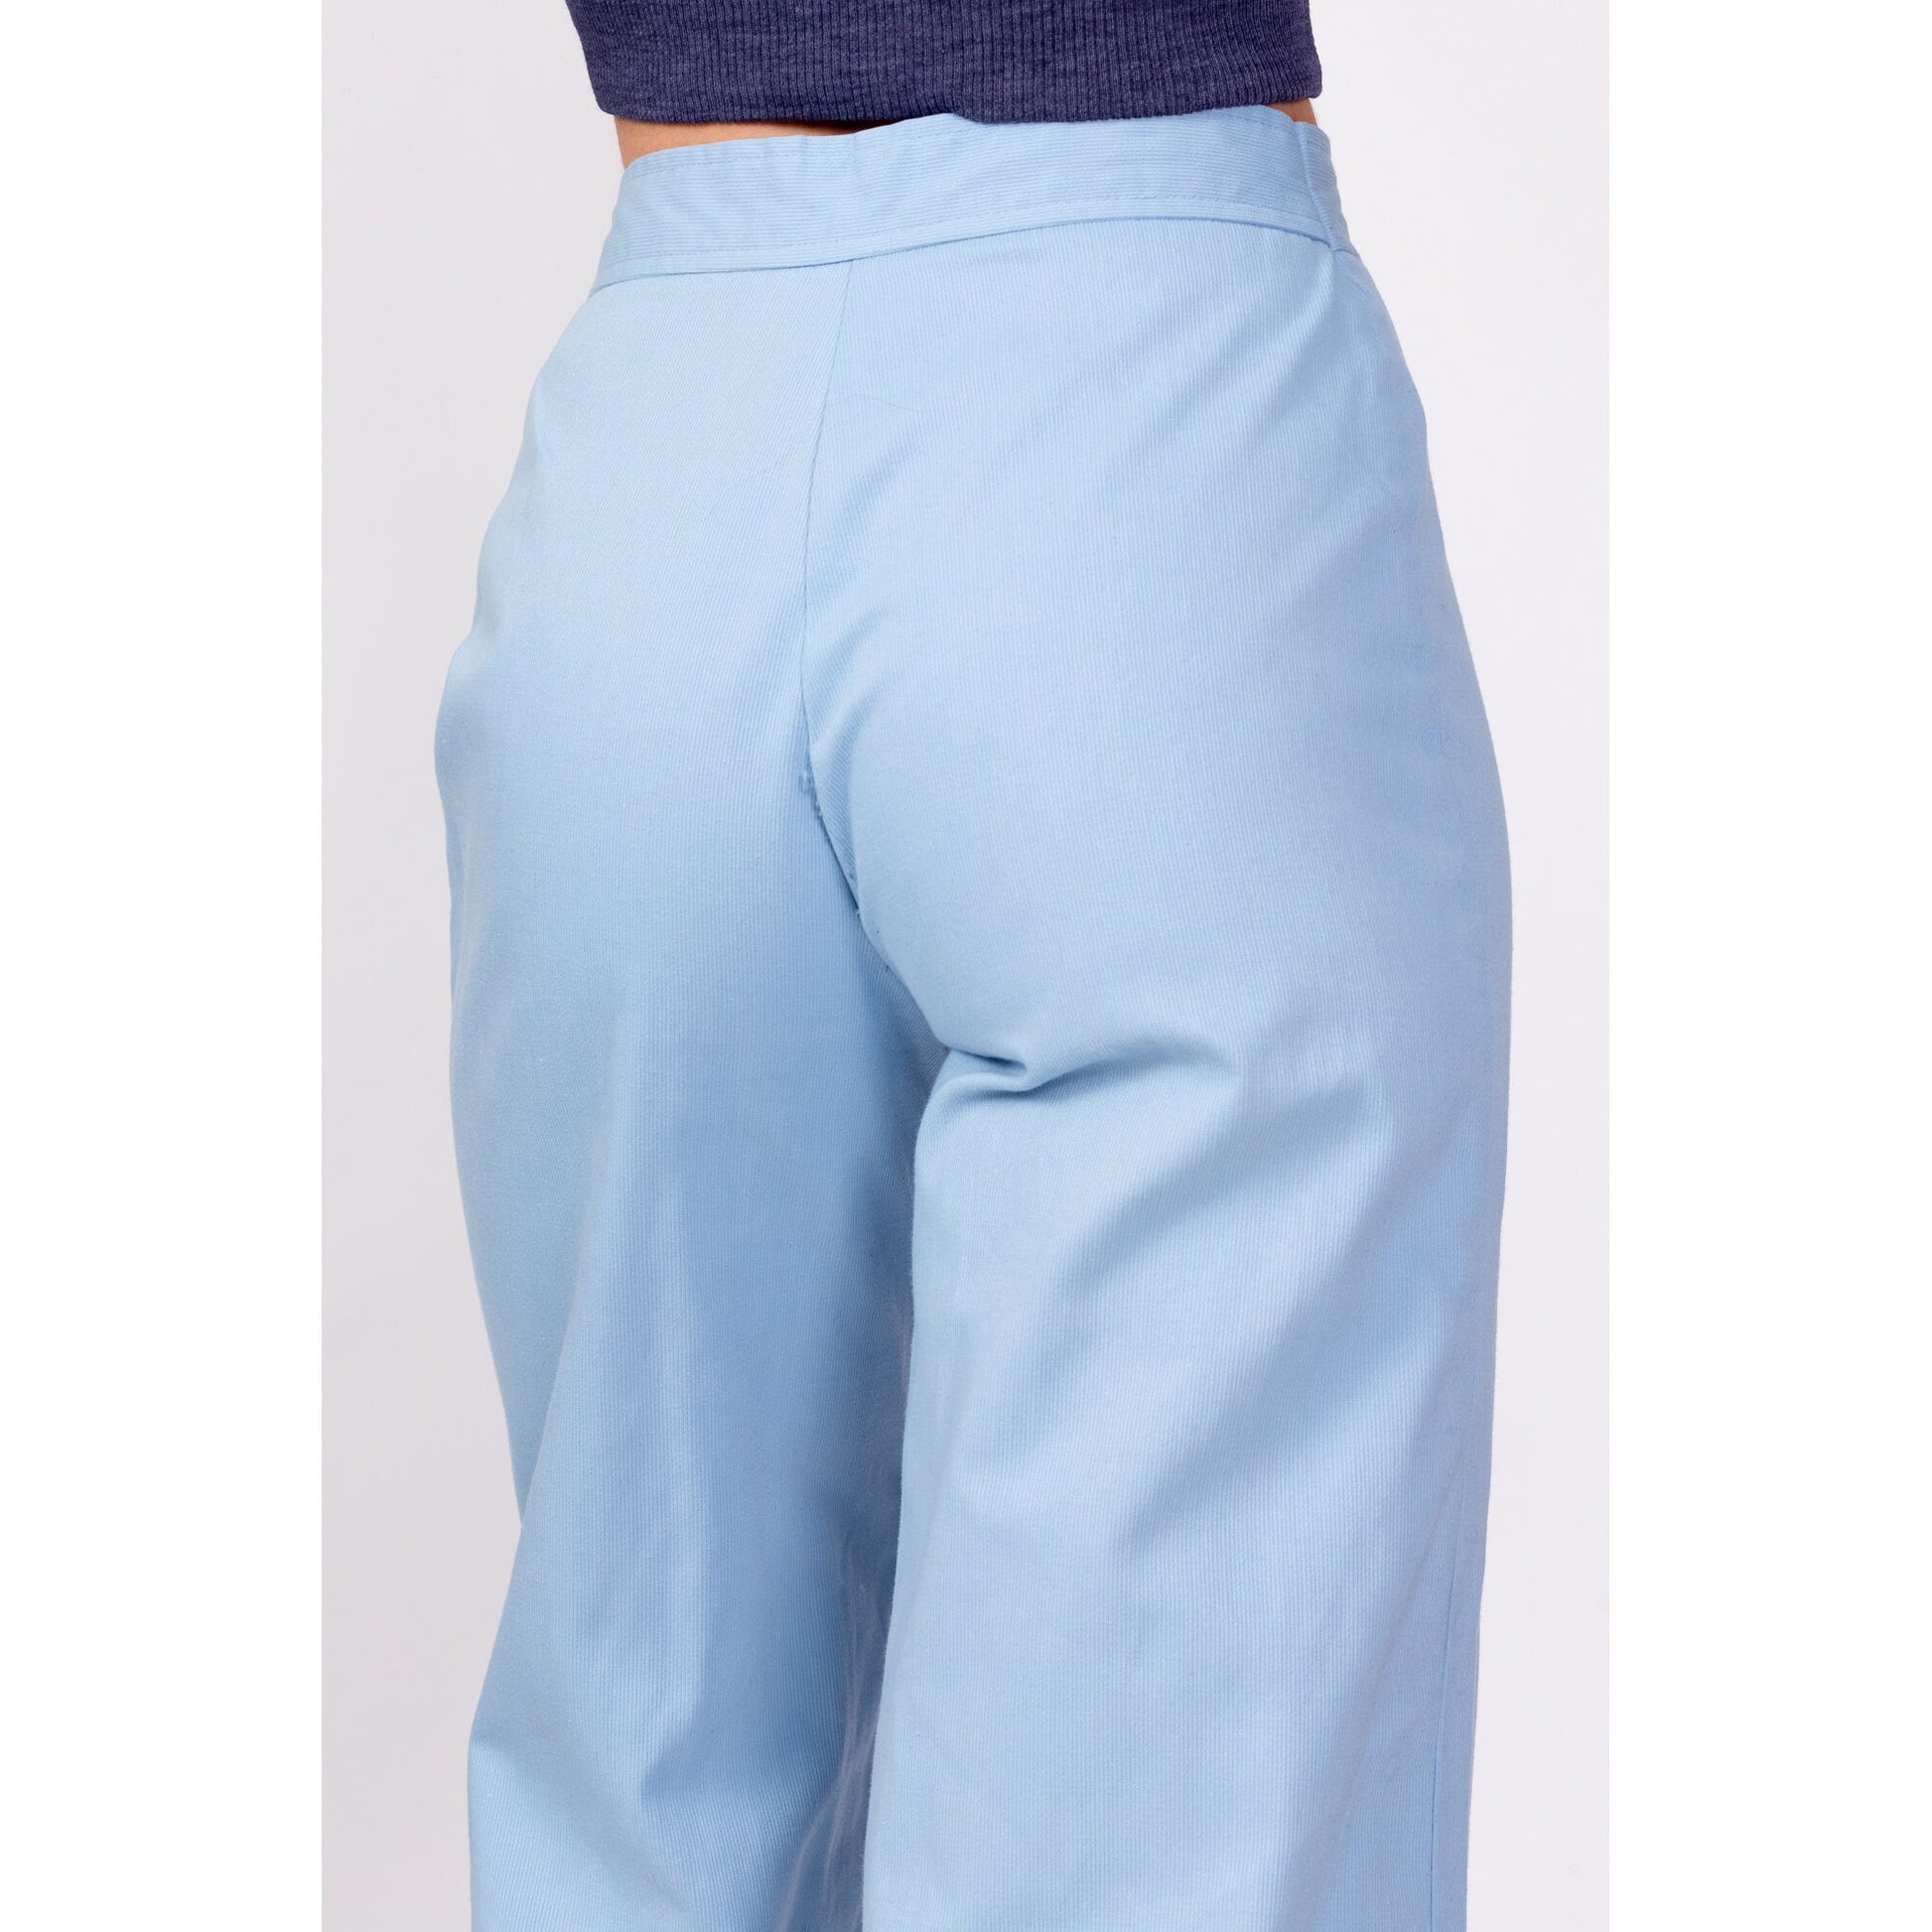 70s Baby Blue Woven Pocket Flared Pants - Extra Small, 24" 